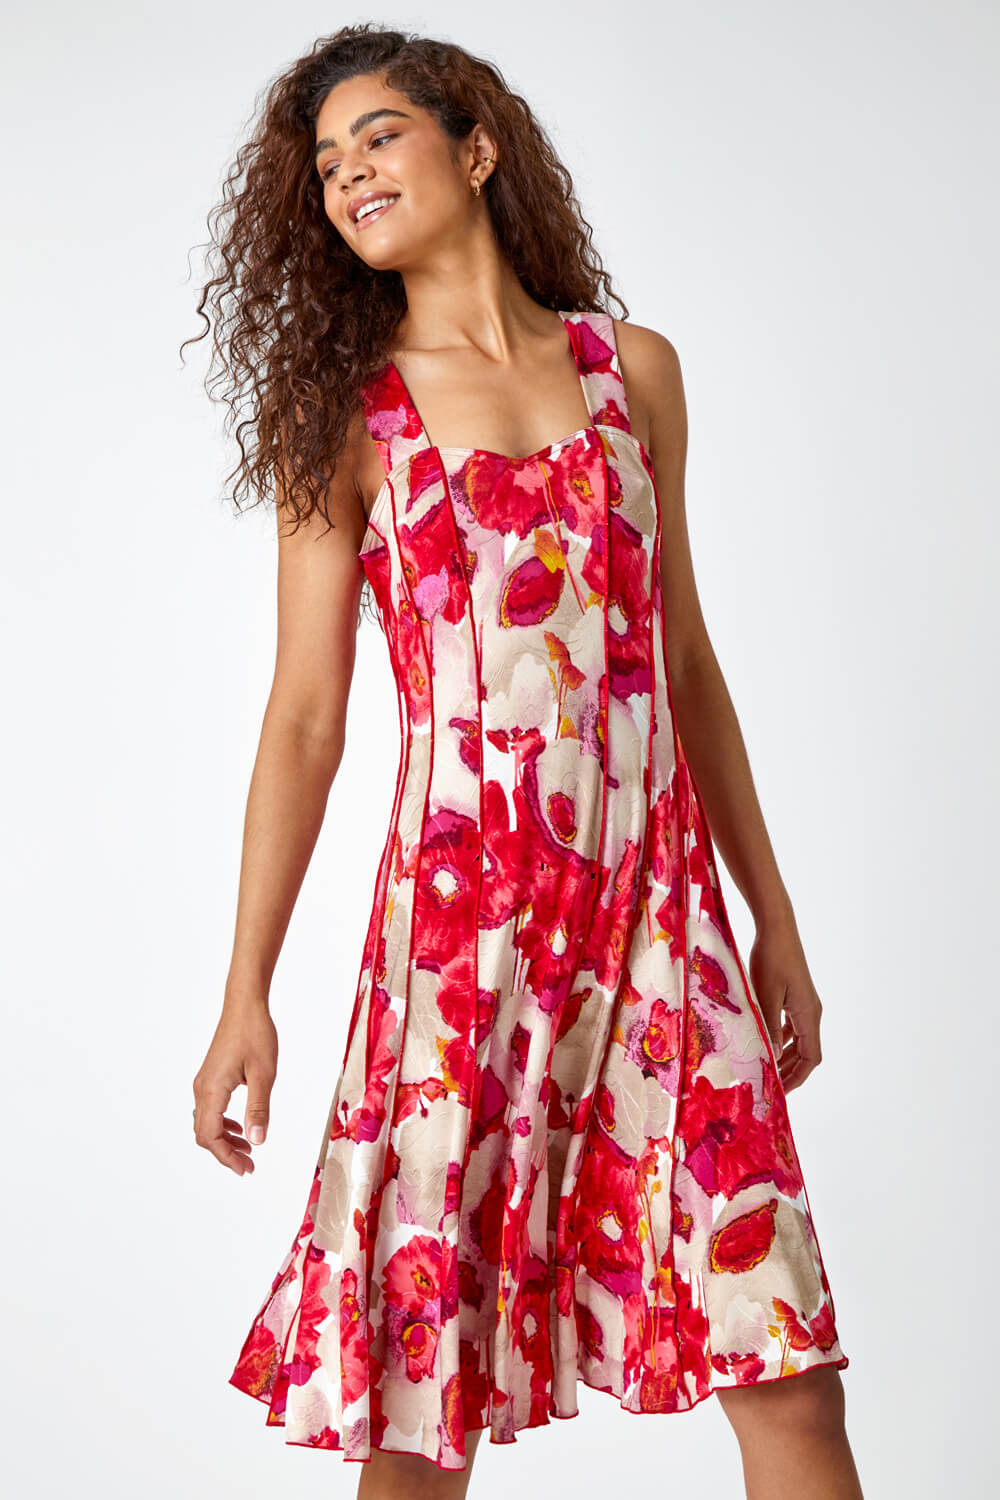 Red Floral Printed Panel Dress, Image 2 of 6